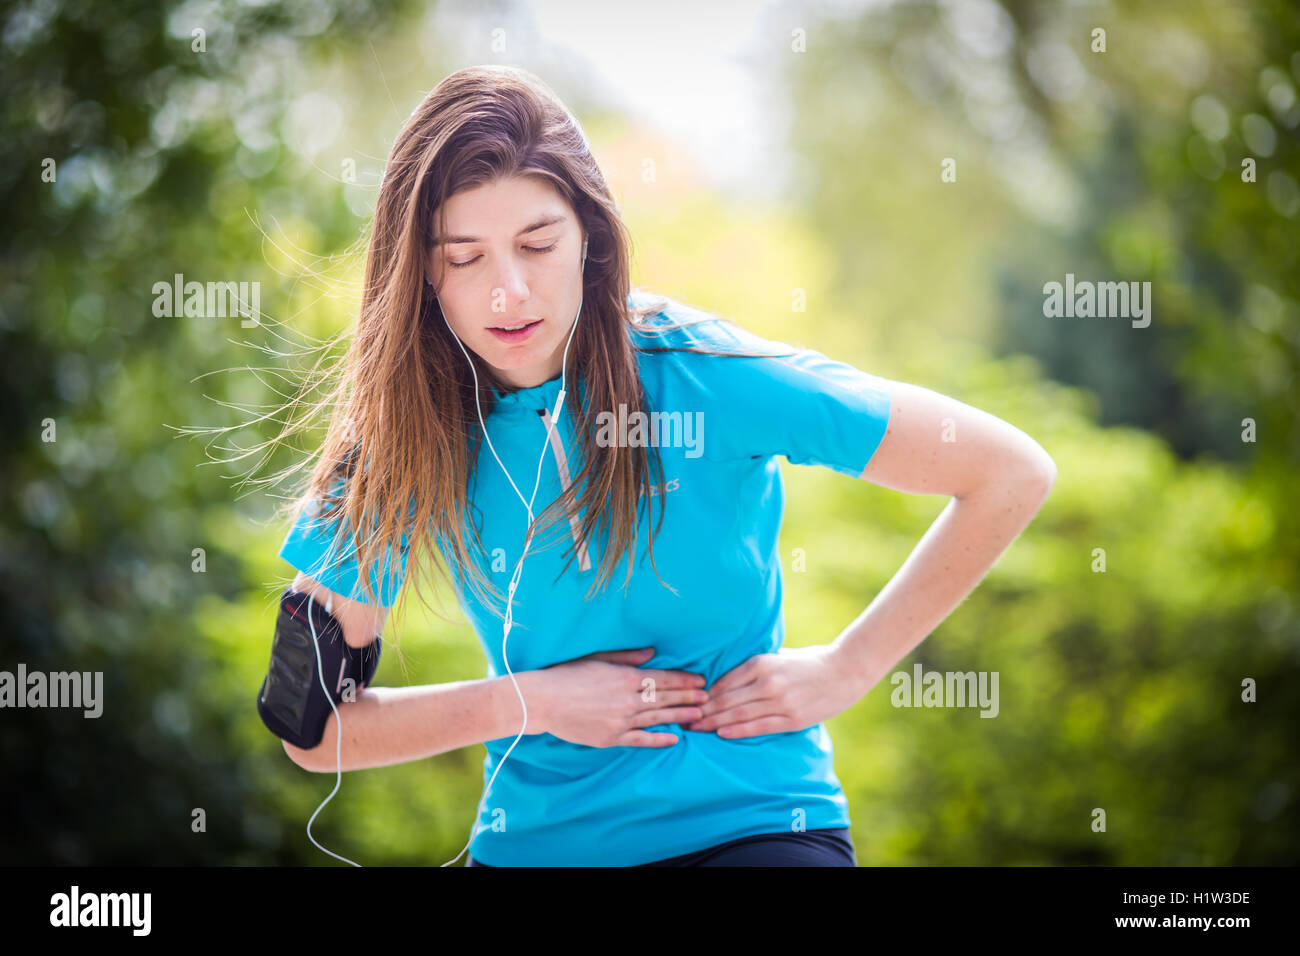 Woman suffering from a stitch. Stock Photo